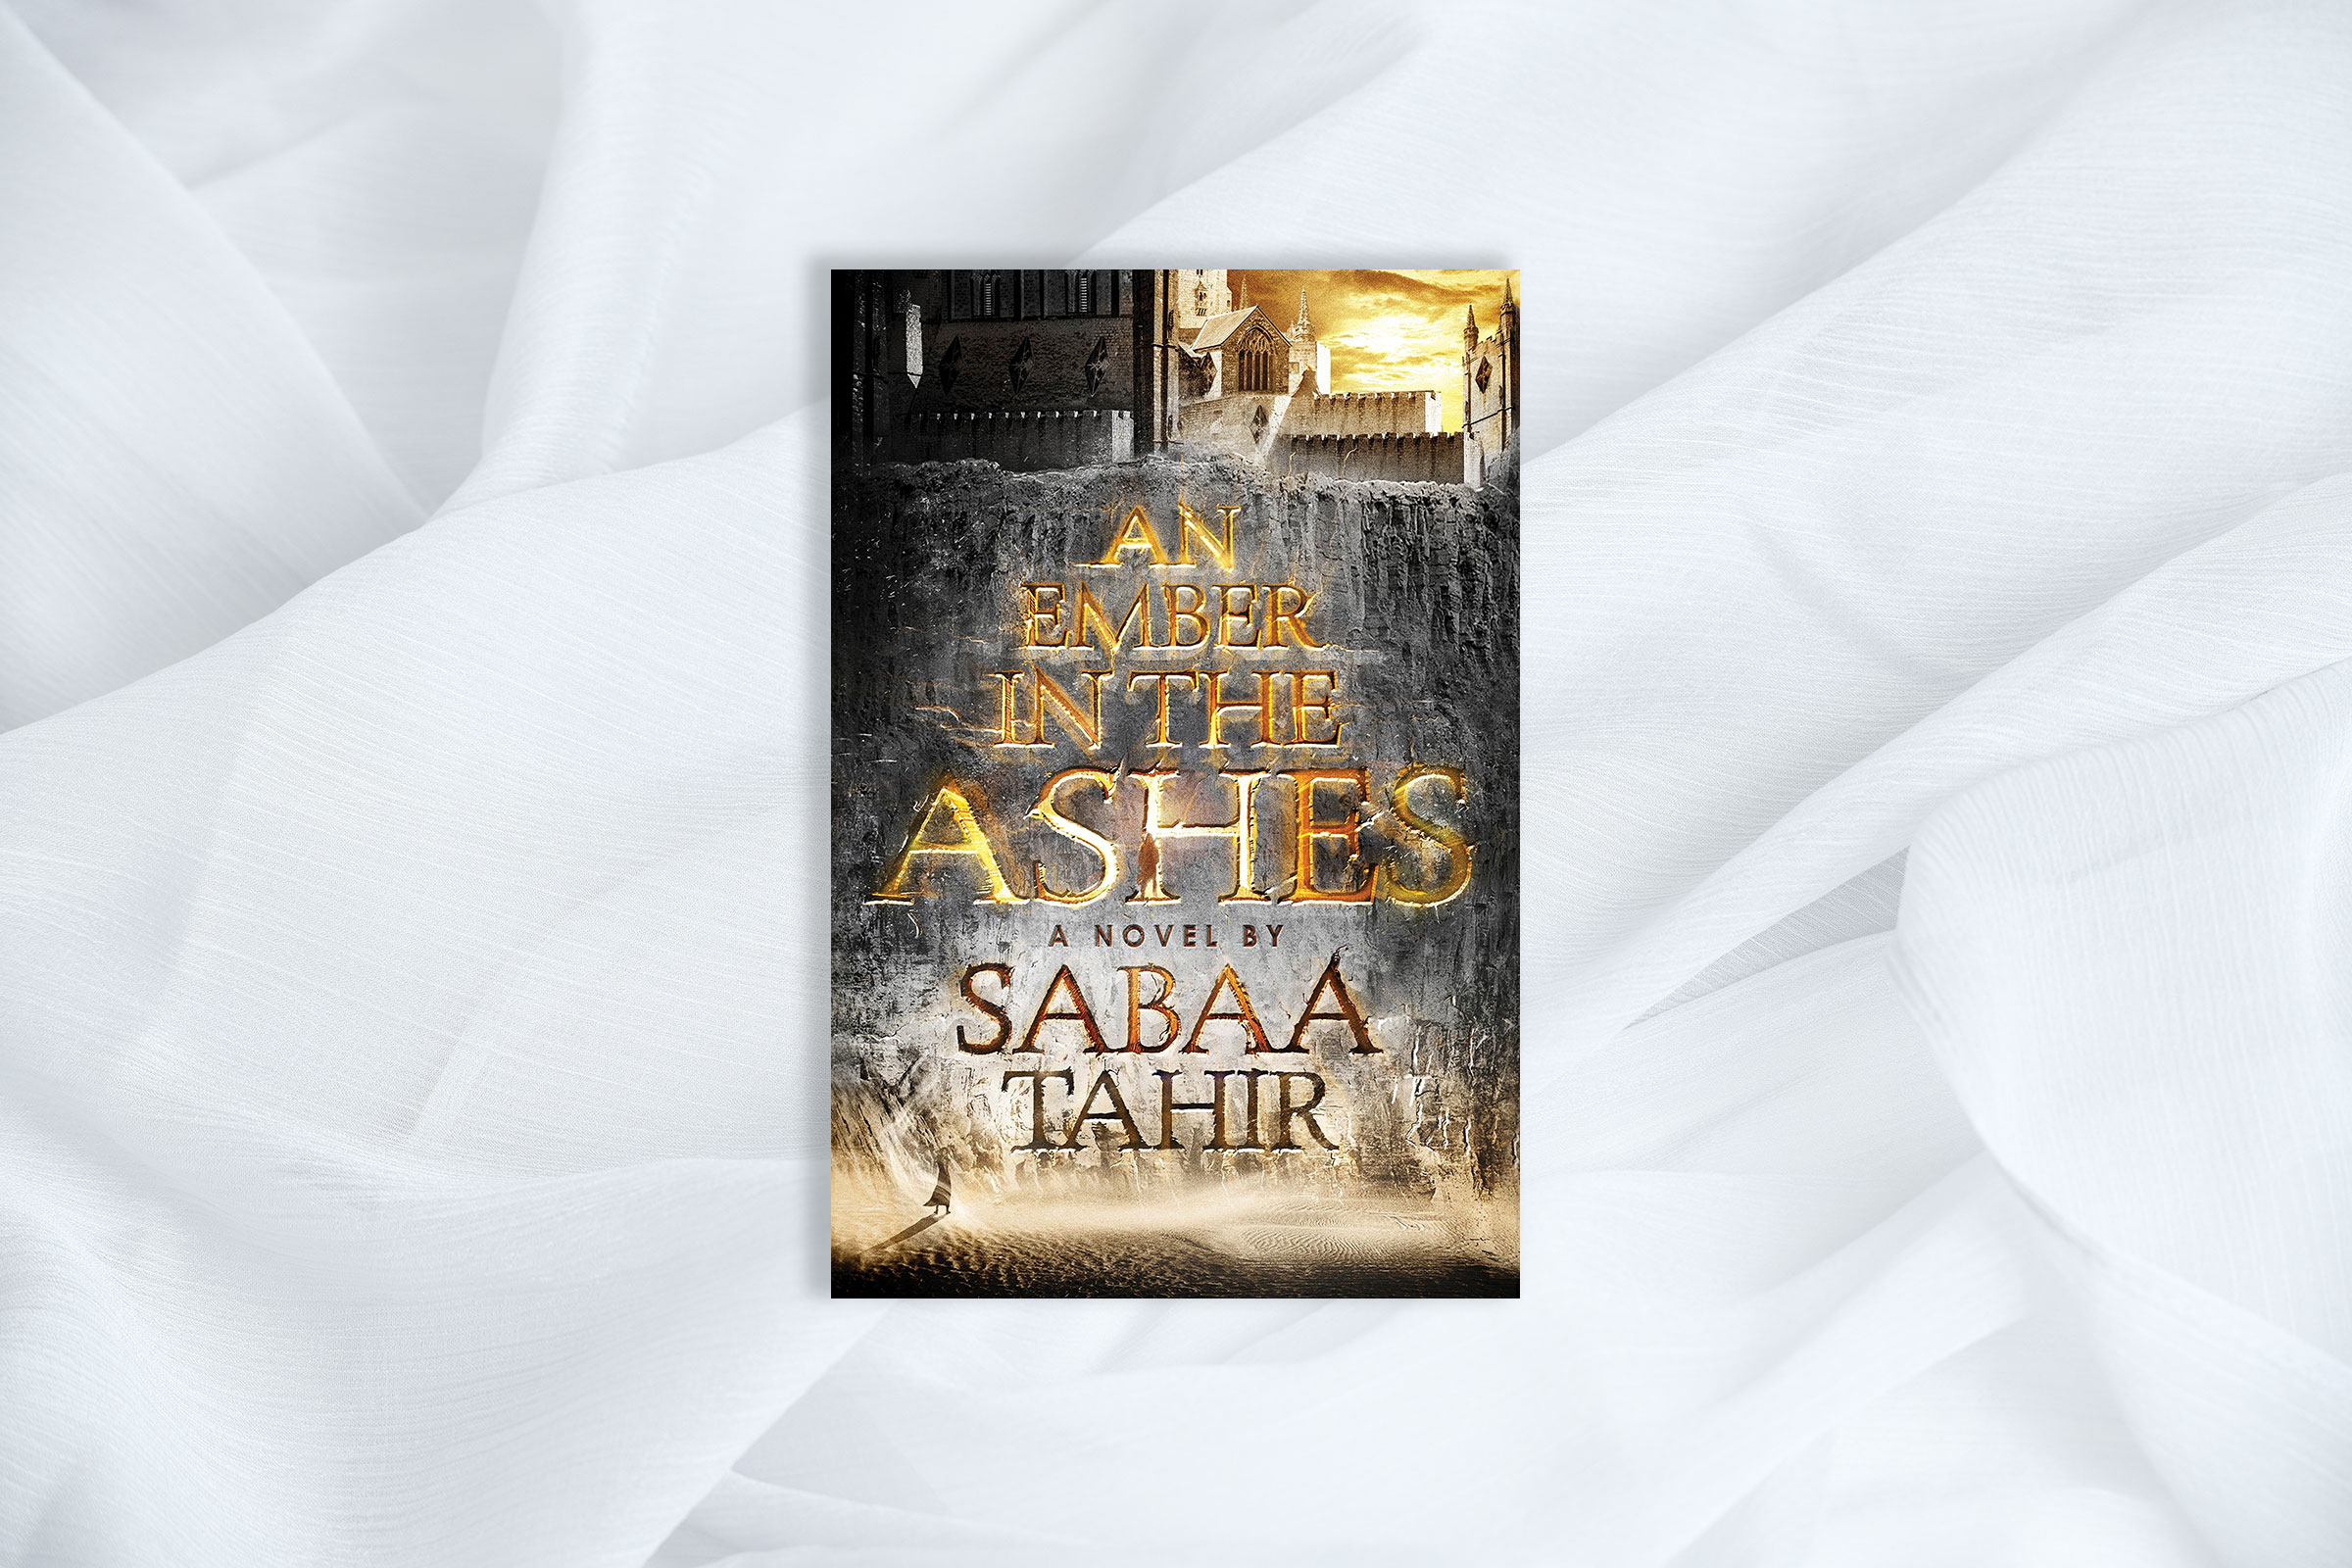 100 Best Fantasy Books: An Ember in the Ashes Sabaa Tahir